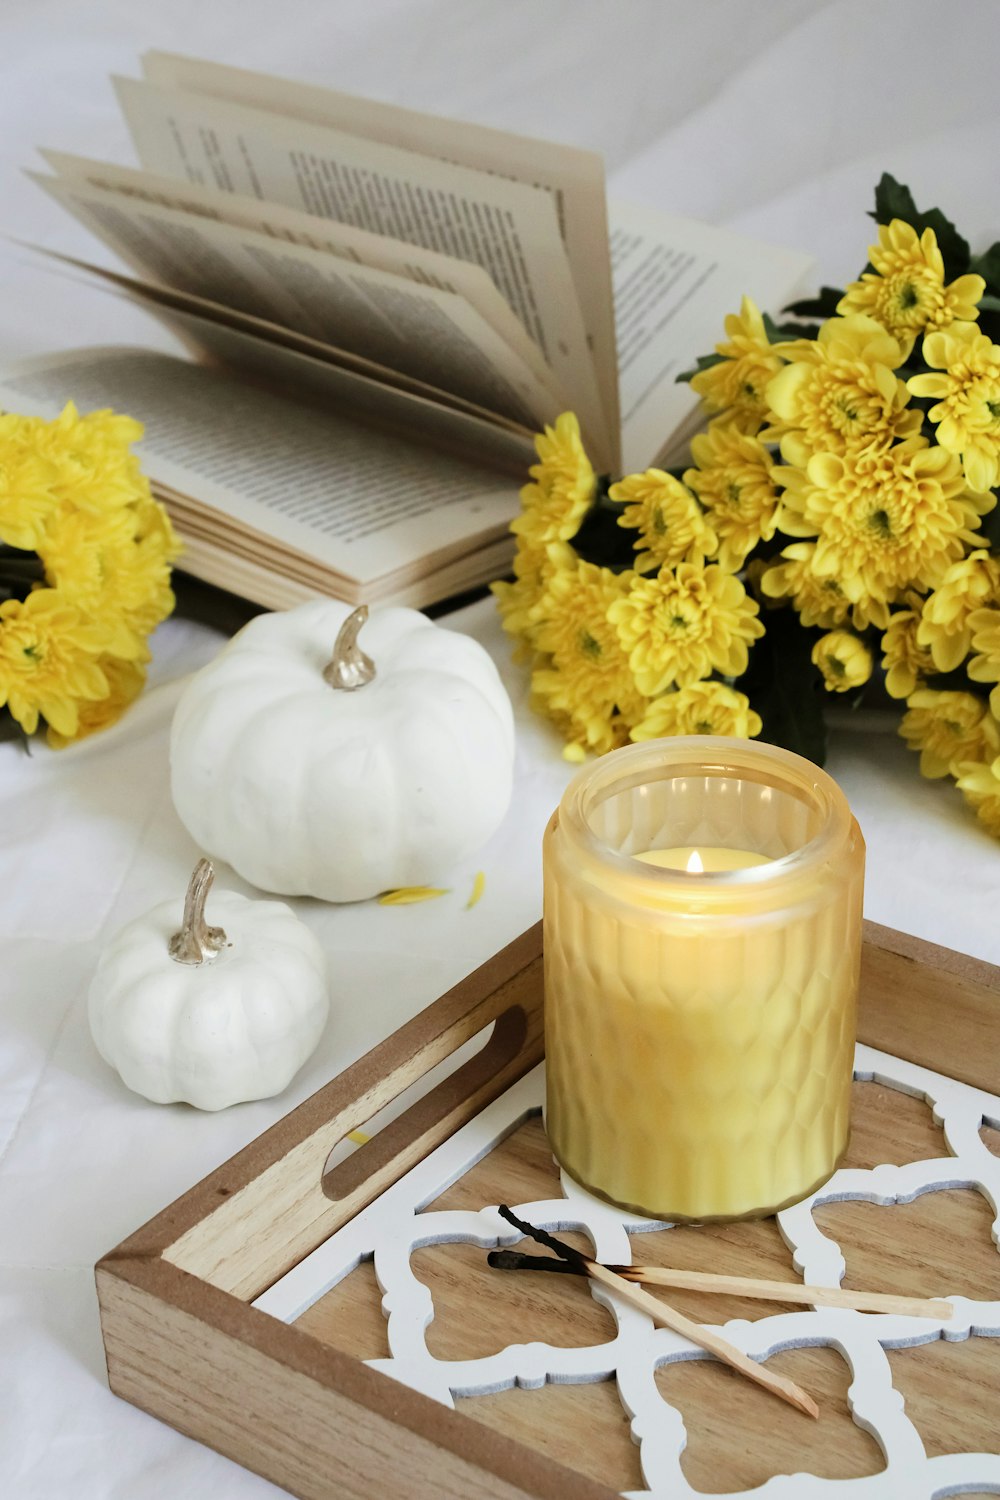 yellow flower beside white candle